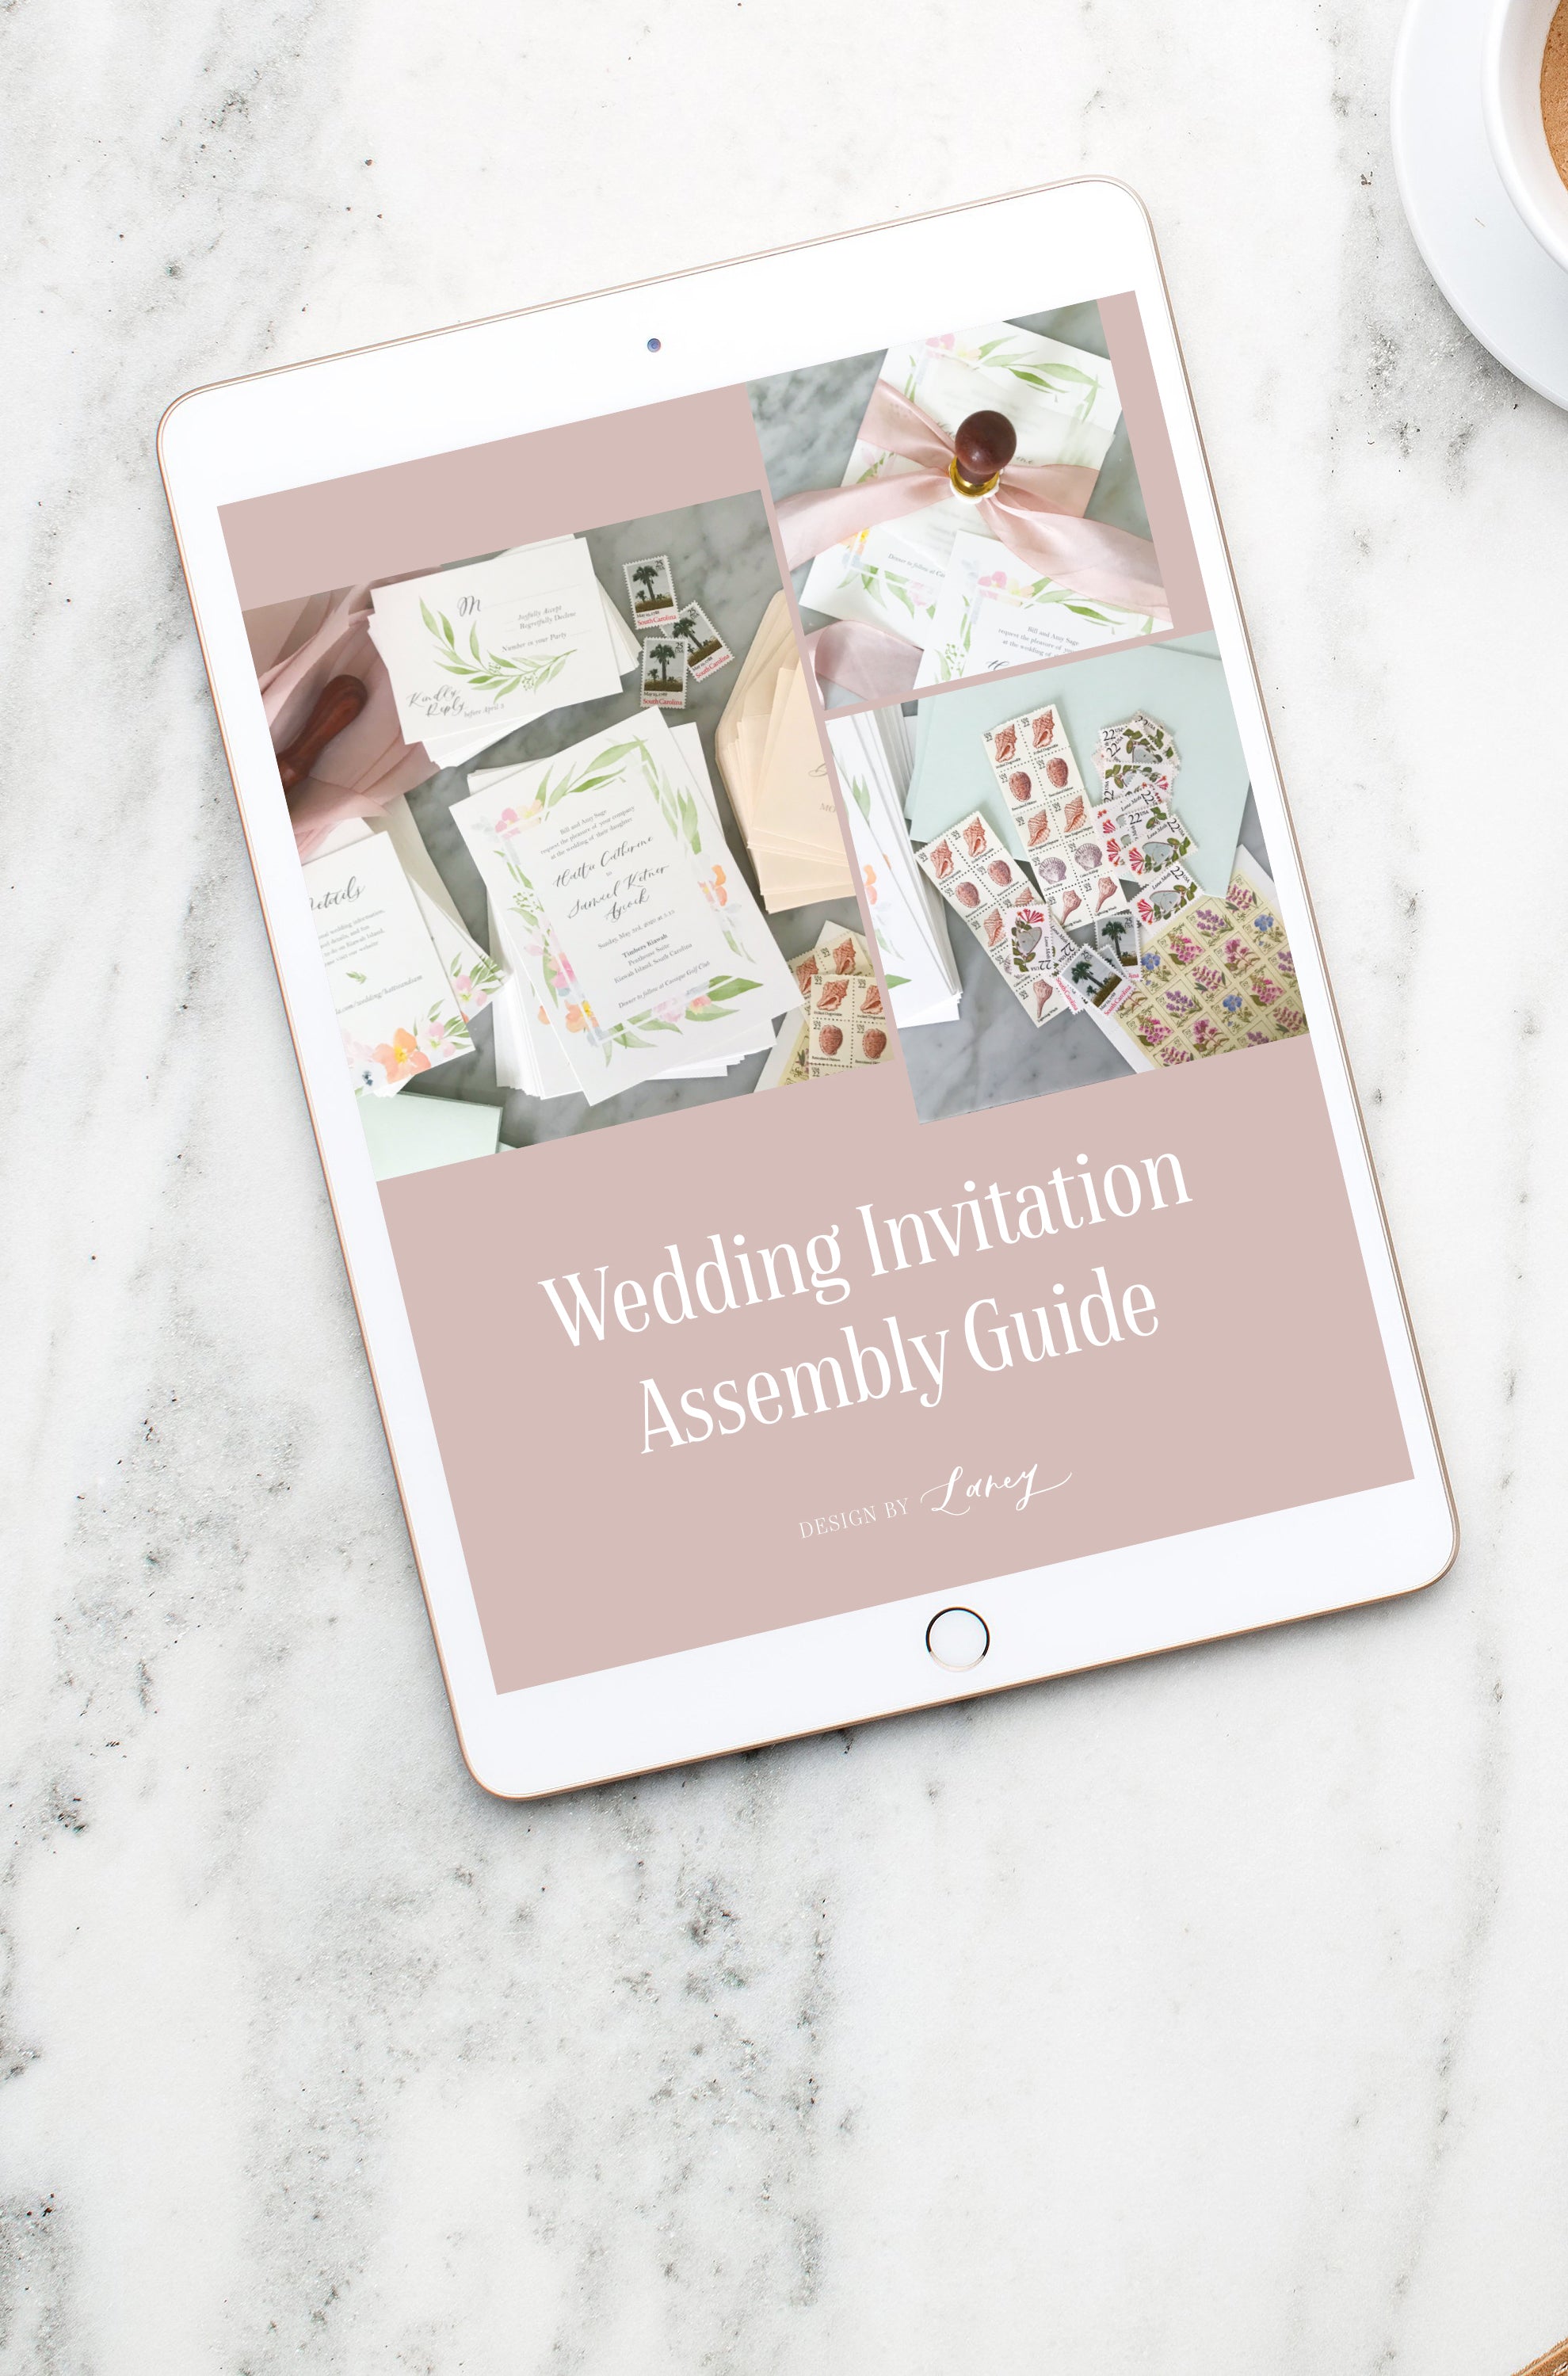 How to Assemble Wedding Invitations